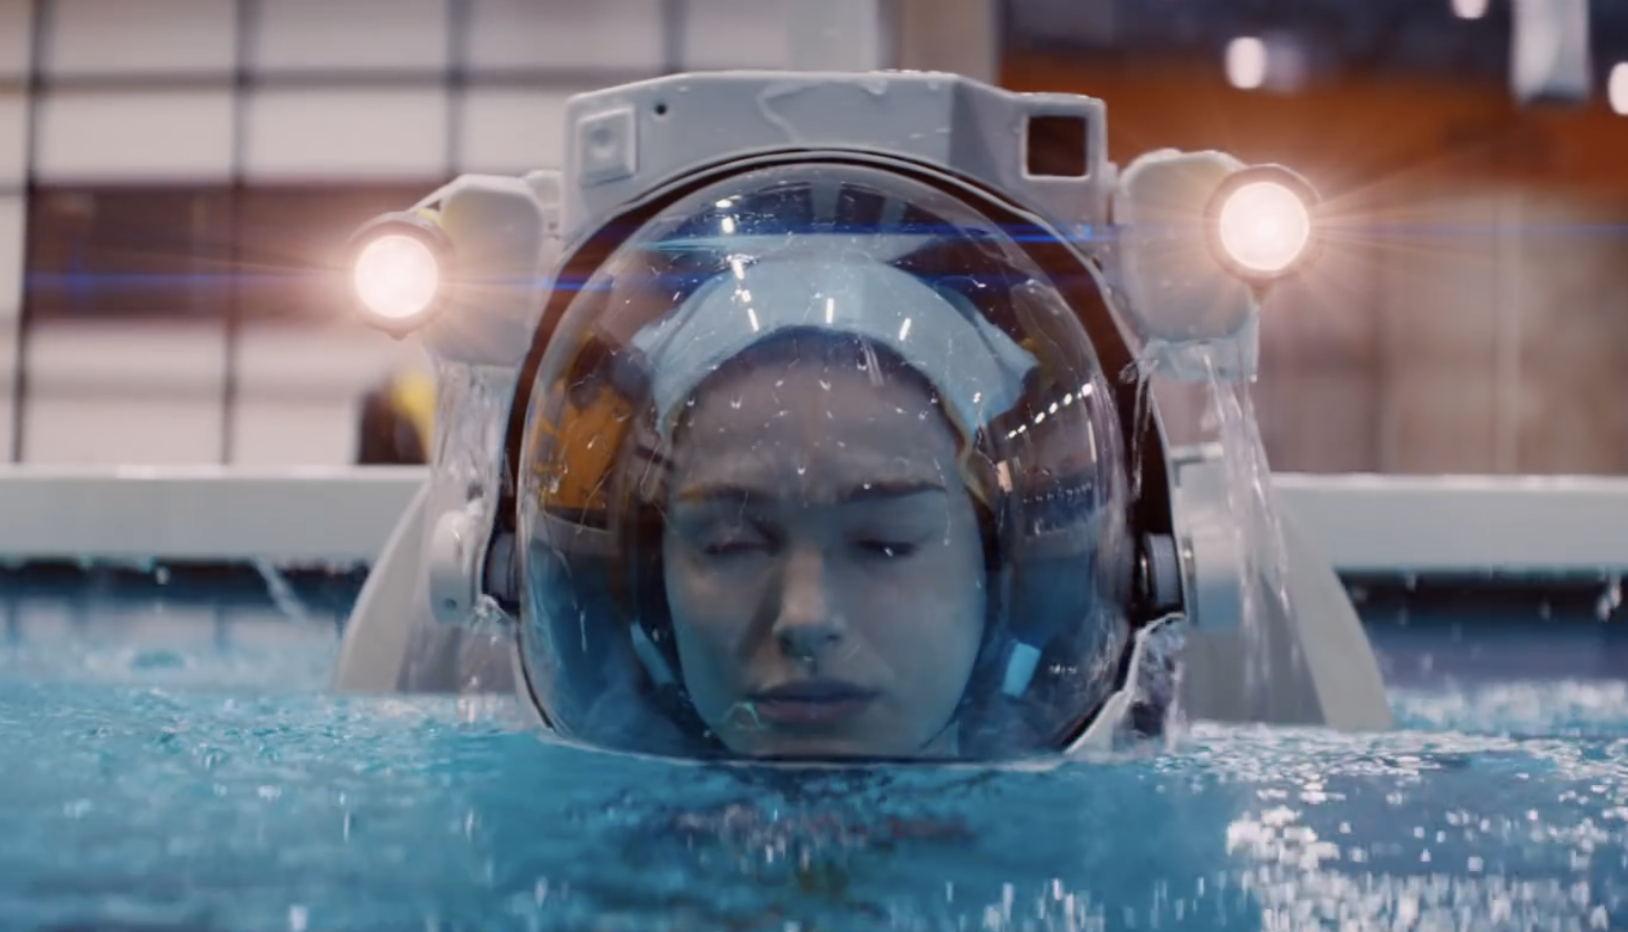 Noah Hawley’s Film Lucy In The Sky, Starring Natalie Portman, Gets A Trailer